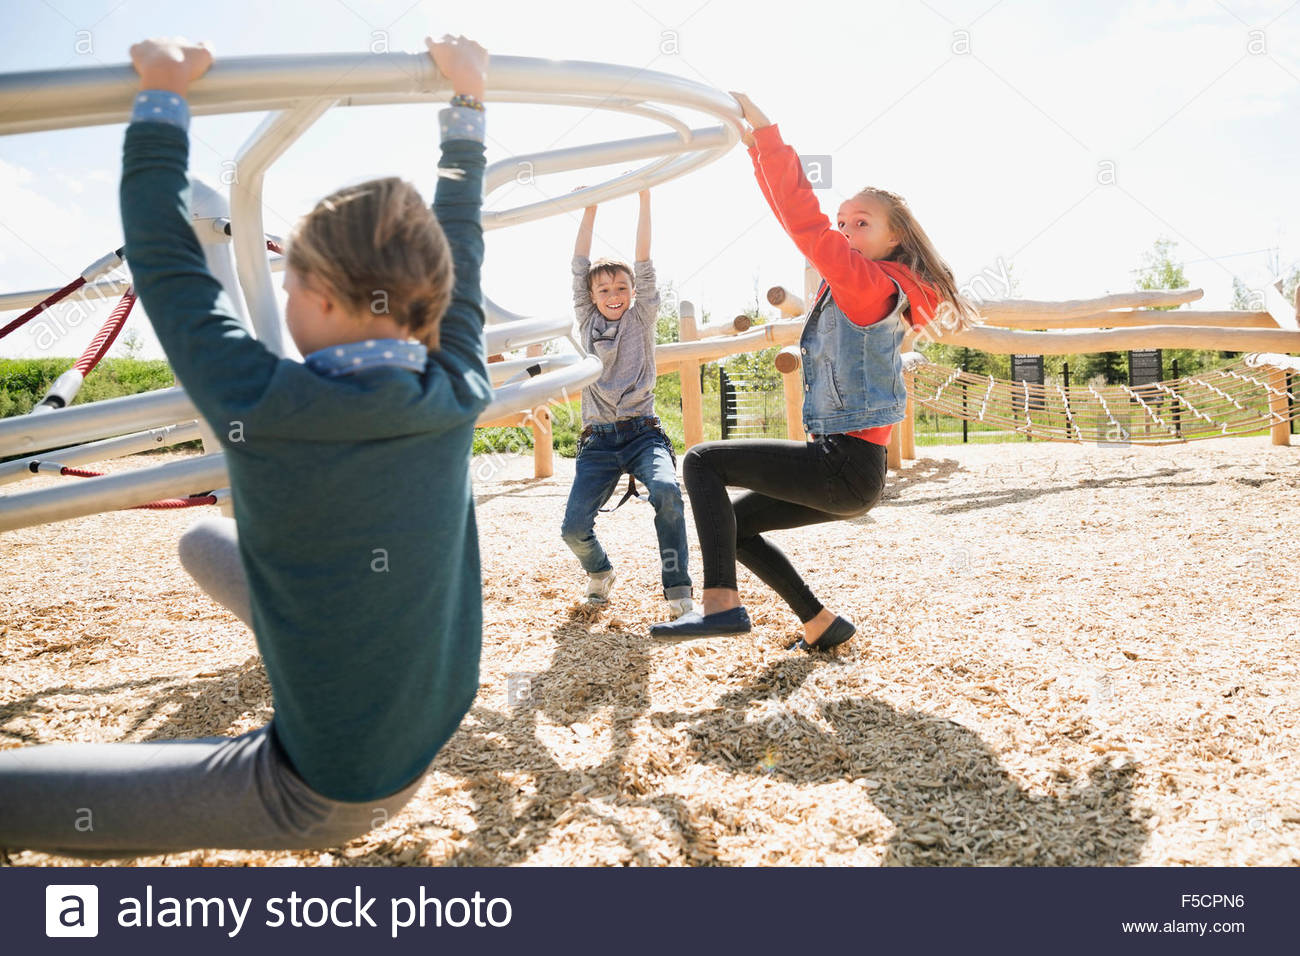 Kids hanging from spinning bar at sunny playground Stock Photo